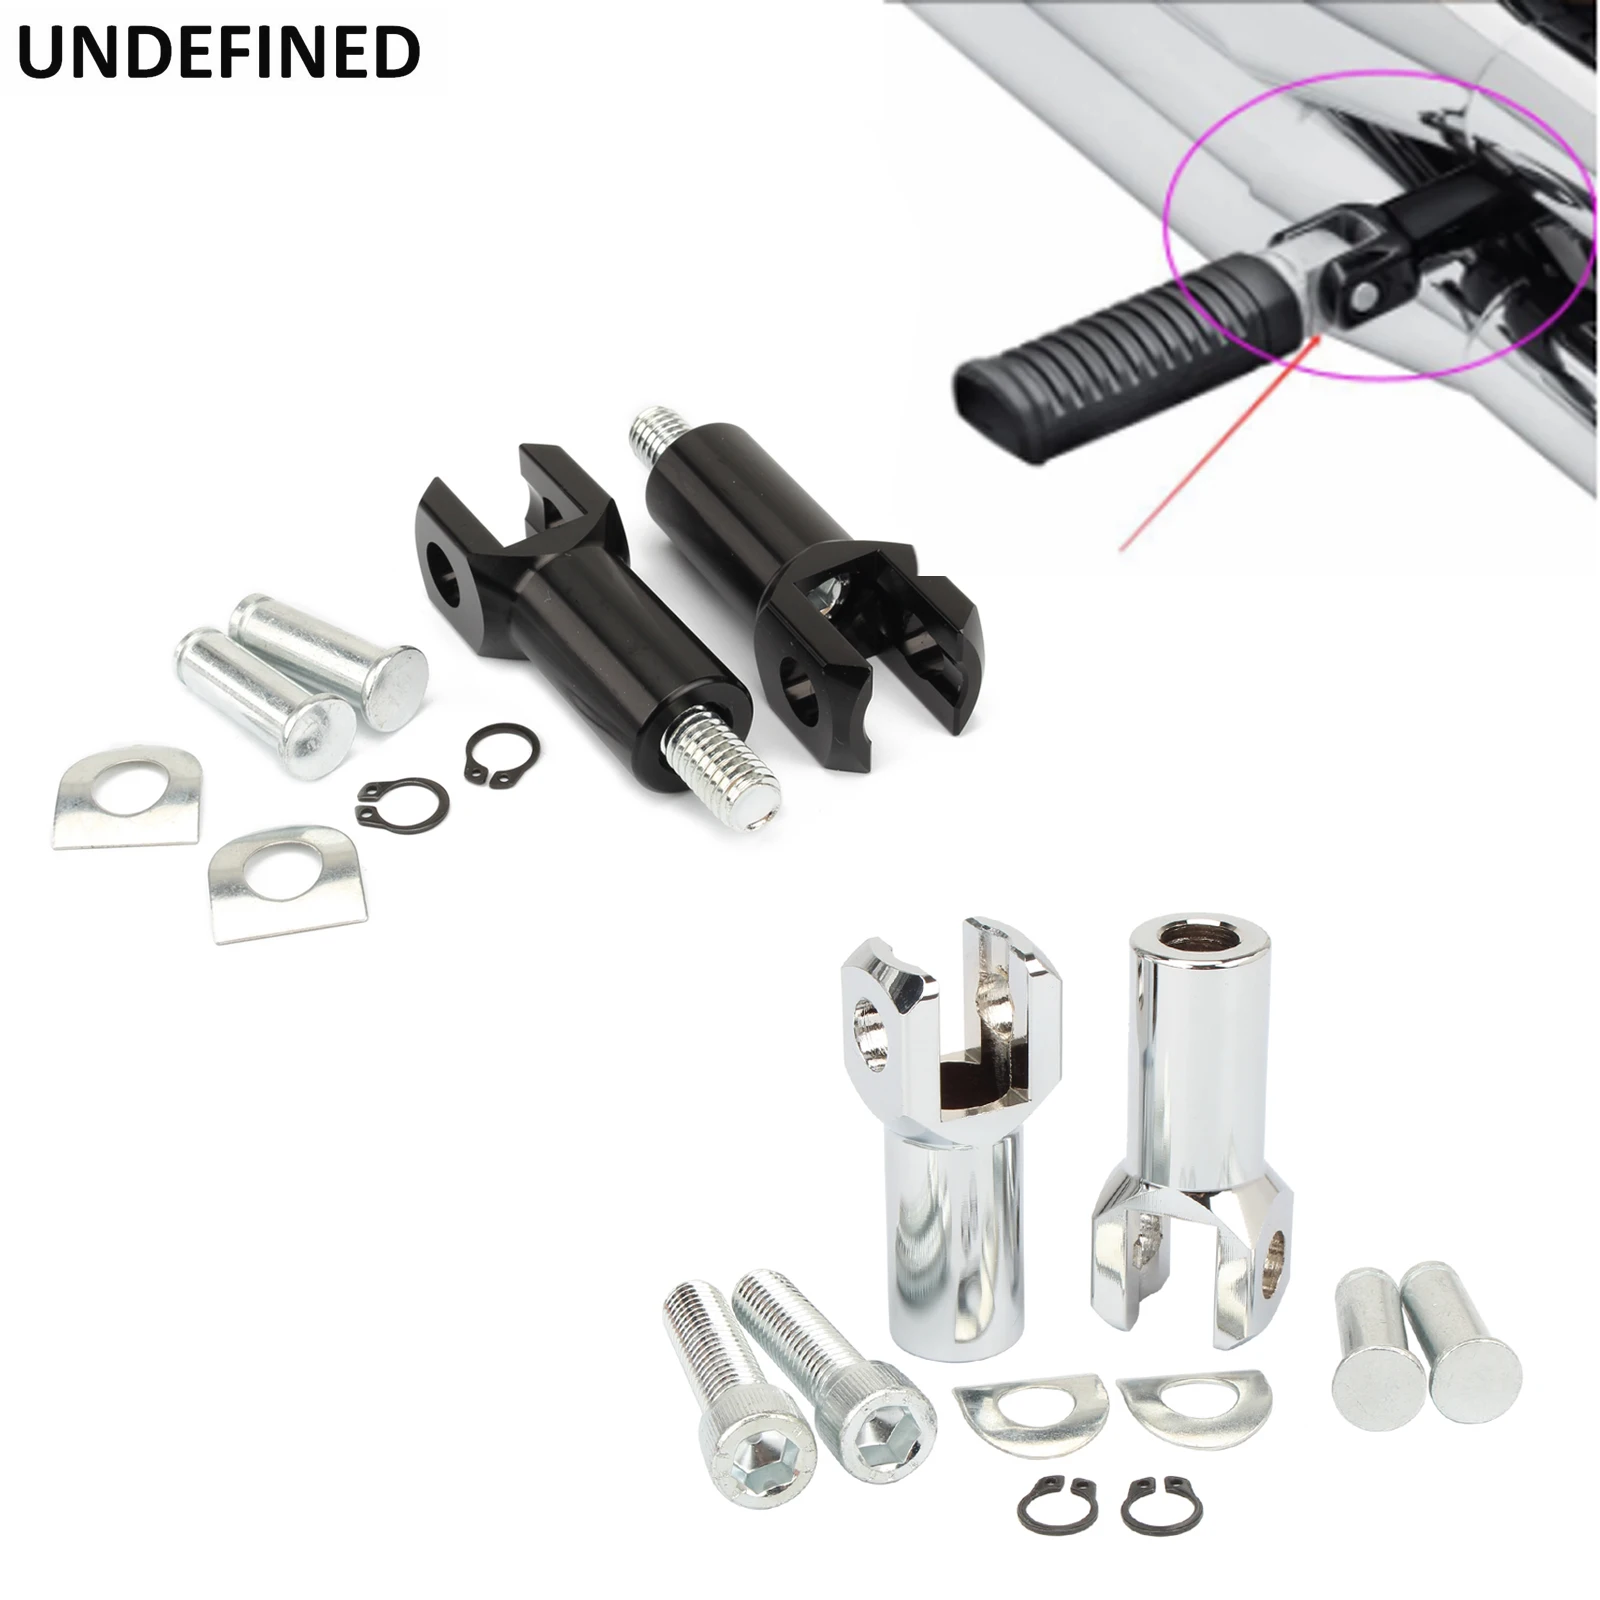 Chrome Passenger Foot Peg Support Mount Clevis Kit Compatible With Harley Davidson Softail 2000-2006 